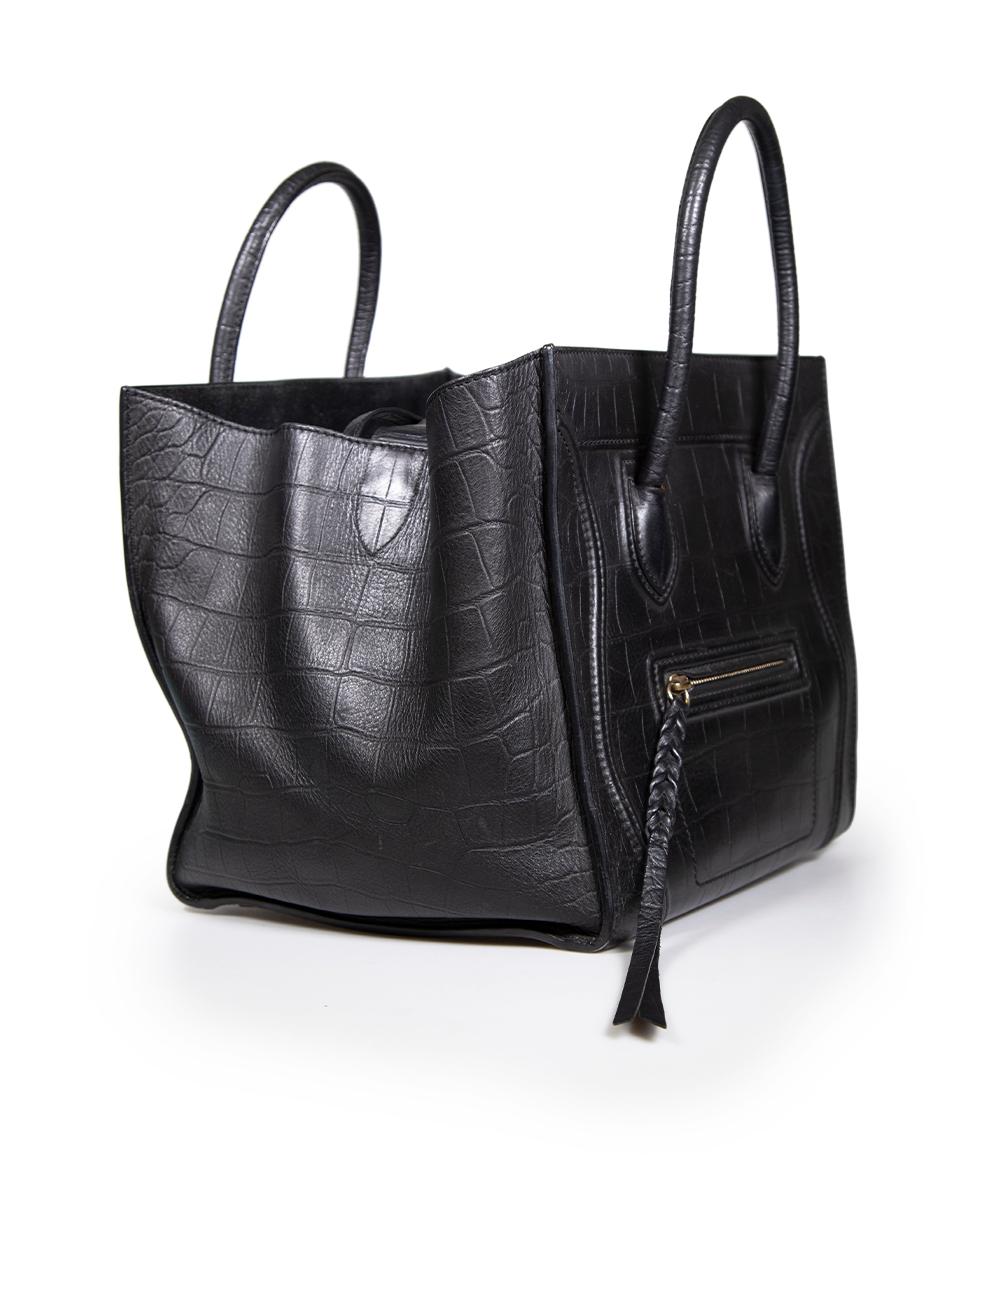 CONDITION is Very good. Minimal wear to bag is evident. Minimal wear to the base corners, rear and lining with abrasions and marks to the leather on this used Céline designer resale item.
 
 
 
 Details
 
 
 Model: Mini Phantom Tote
 
 Black
 
